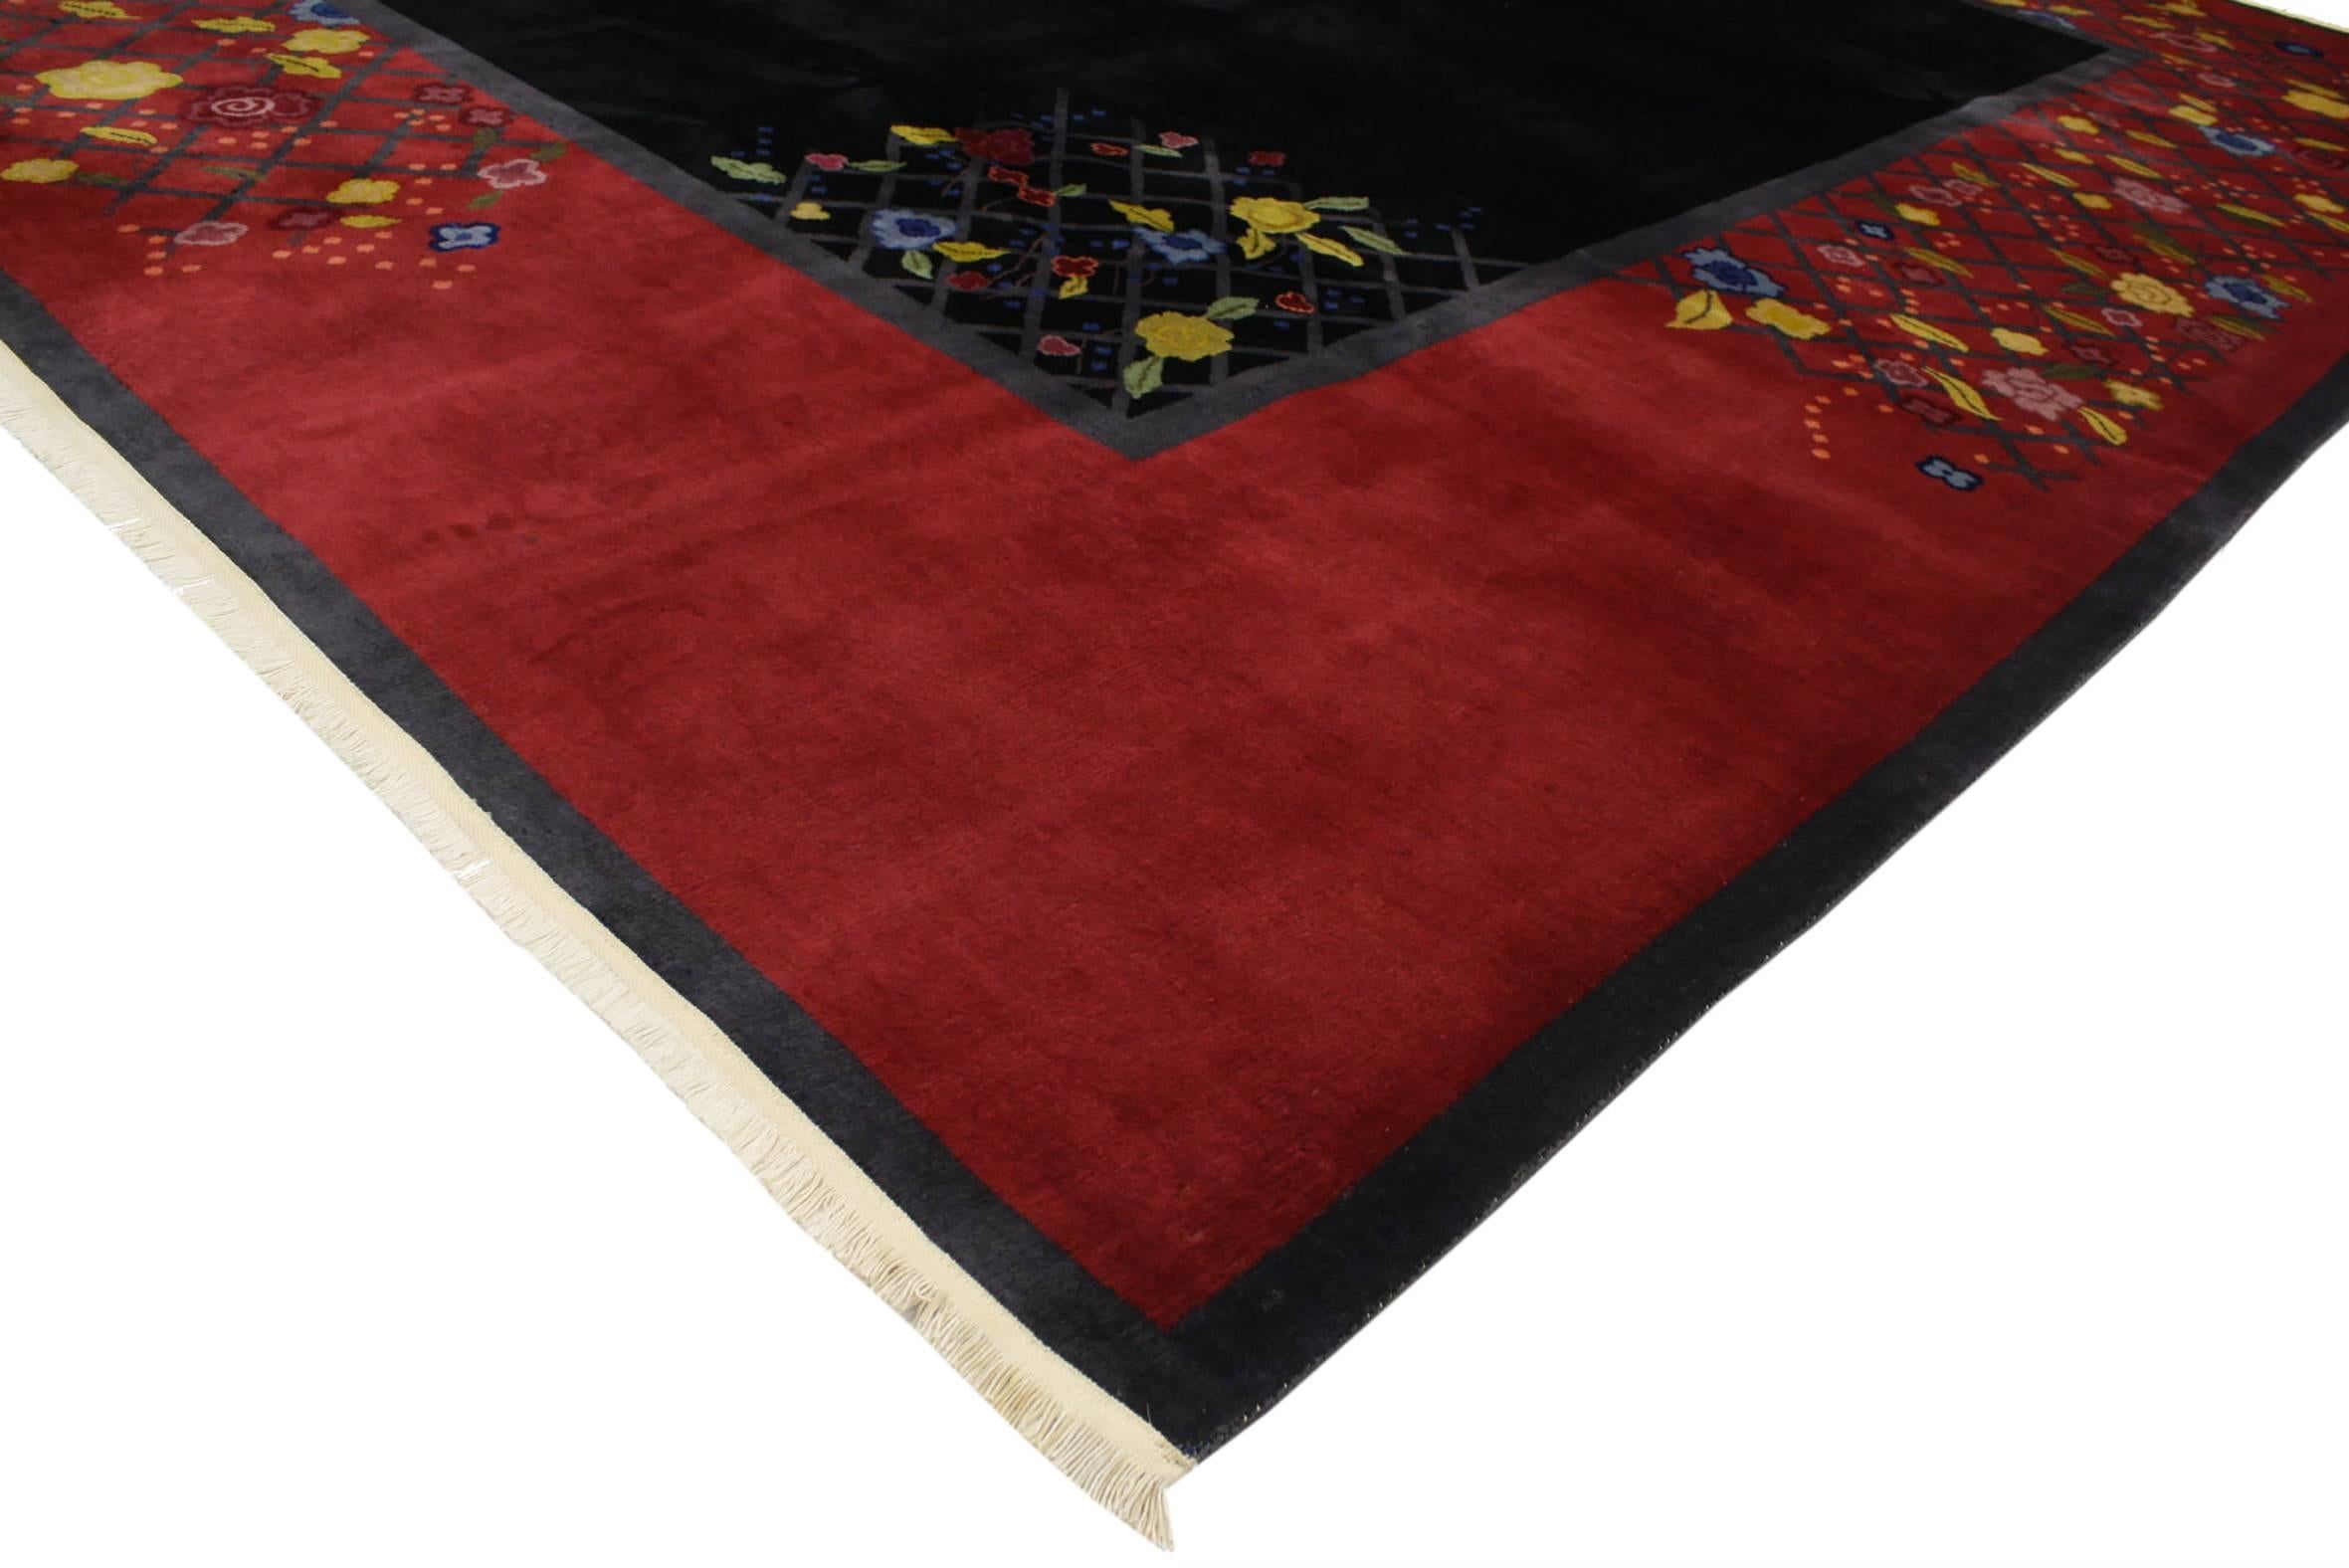 76906 Antique Chinese Art Deco Rug with Eclectic Jazz Age Style 08'09 x 11'03. ​​Energize your space with this 1920s Chinese Art Deco rug. A striking mix of vibrant jewel-tone colors and traditional Chinese flowers, this Art Deco rug is bold and